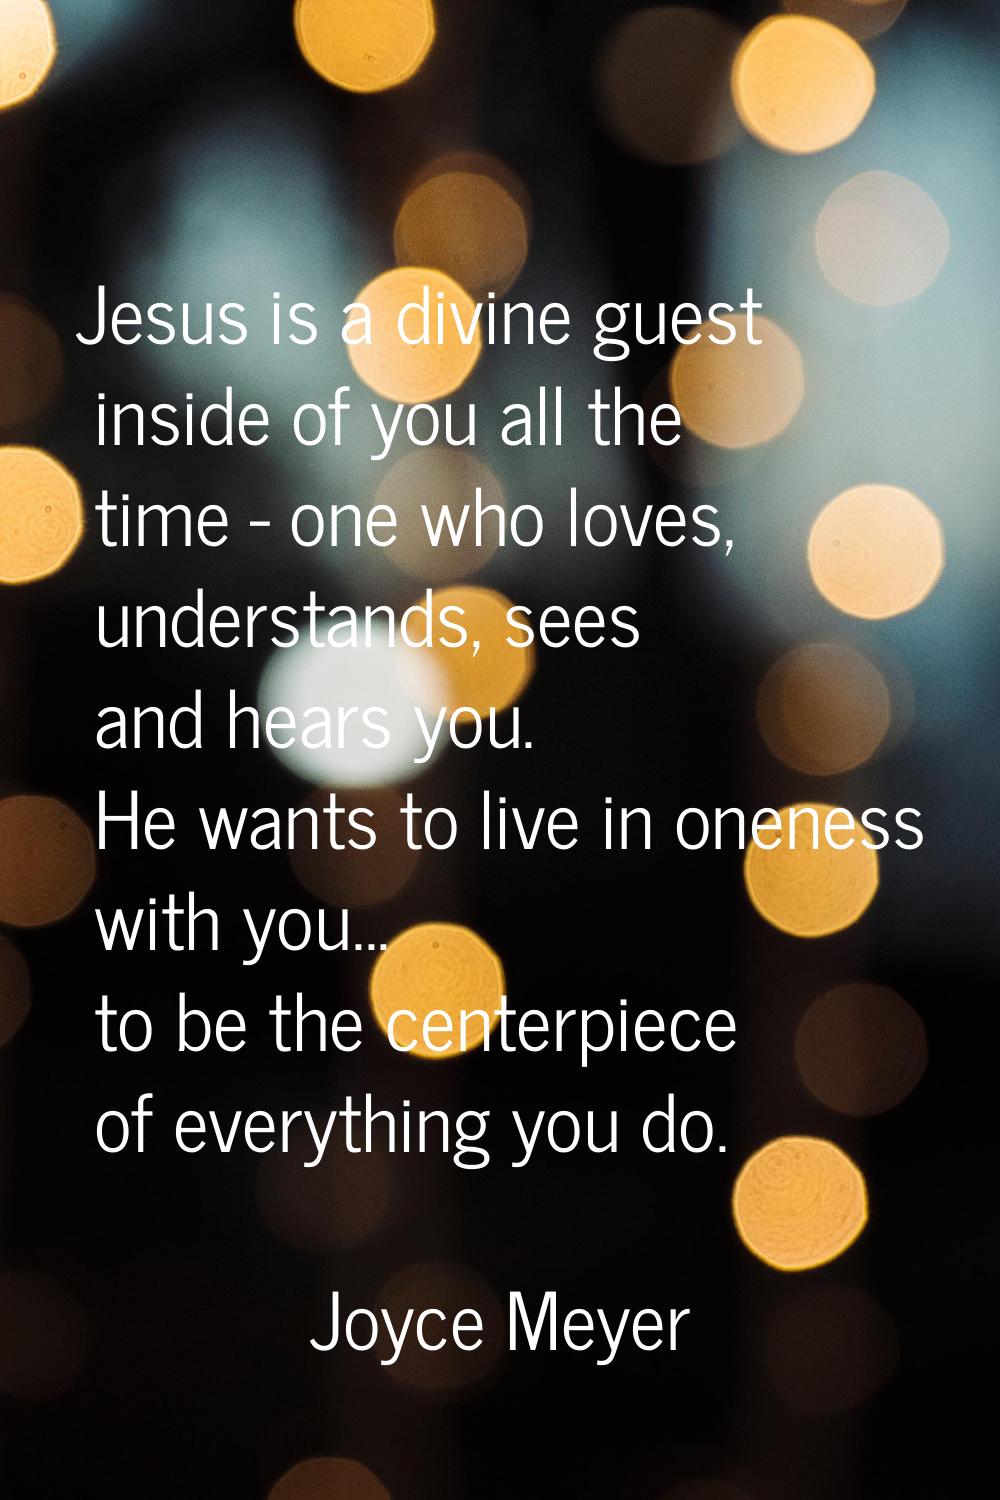 Jesus is a divine guest inside of you all the time - one who loves, understands, sees and hears you